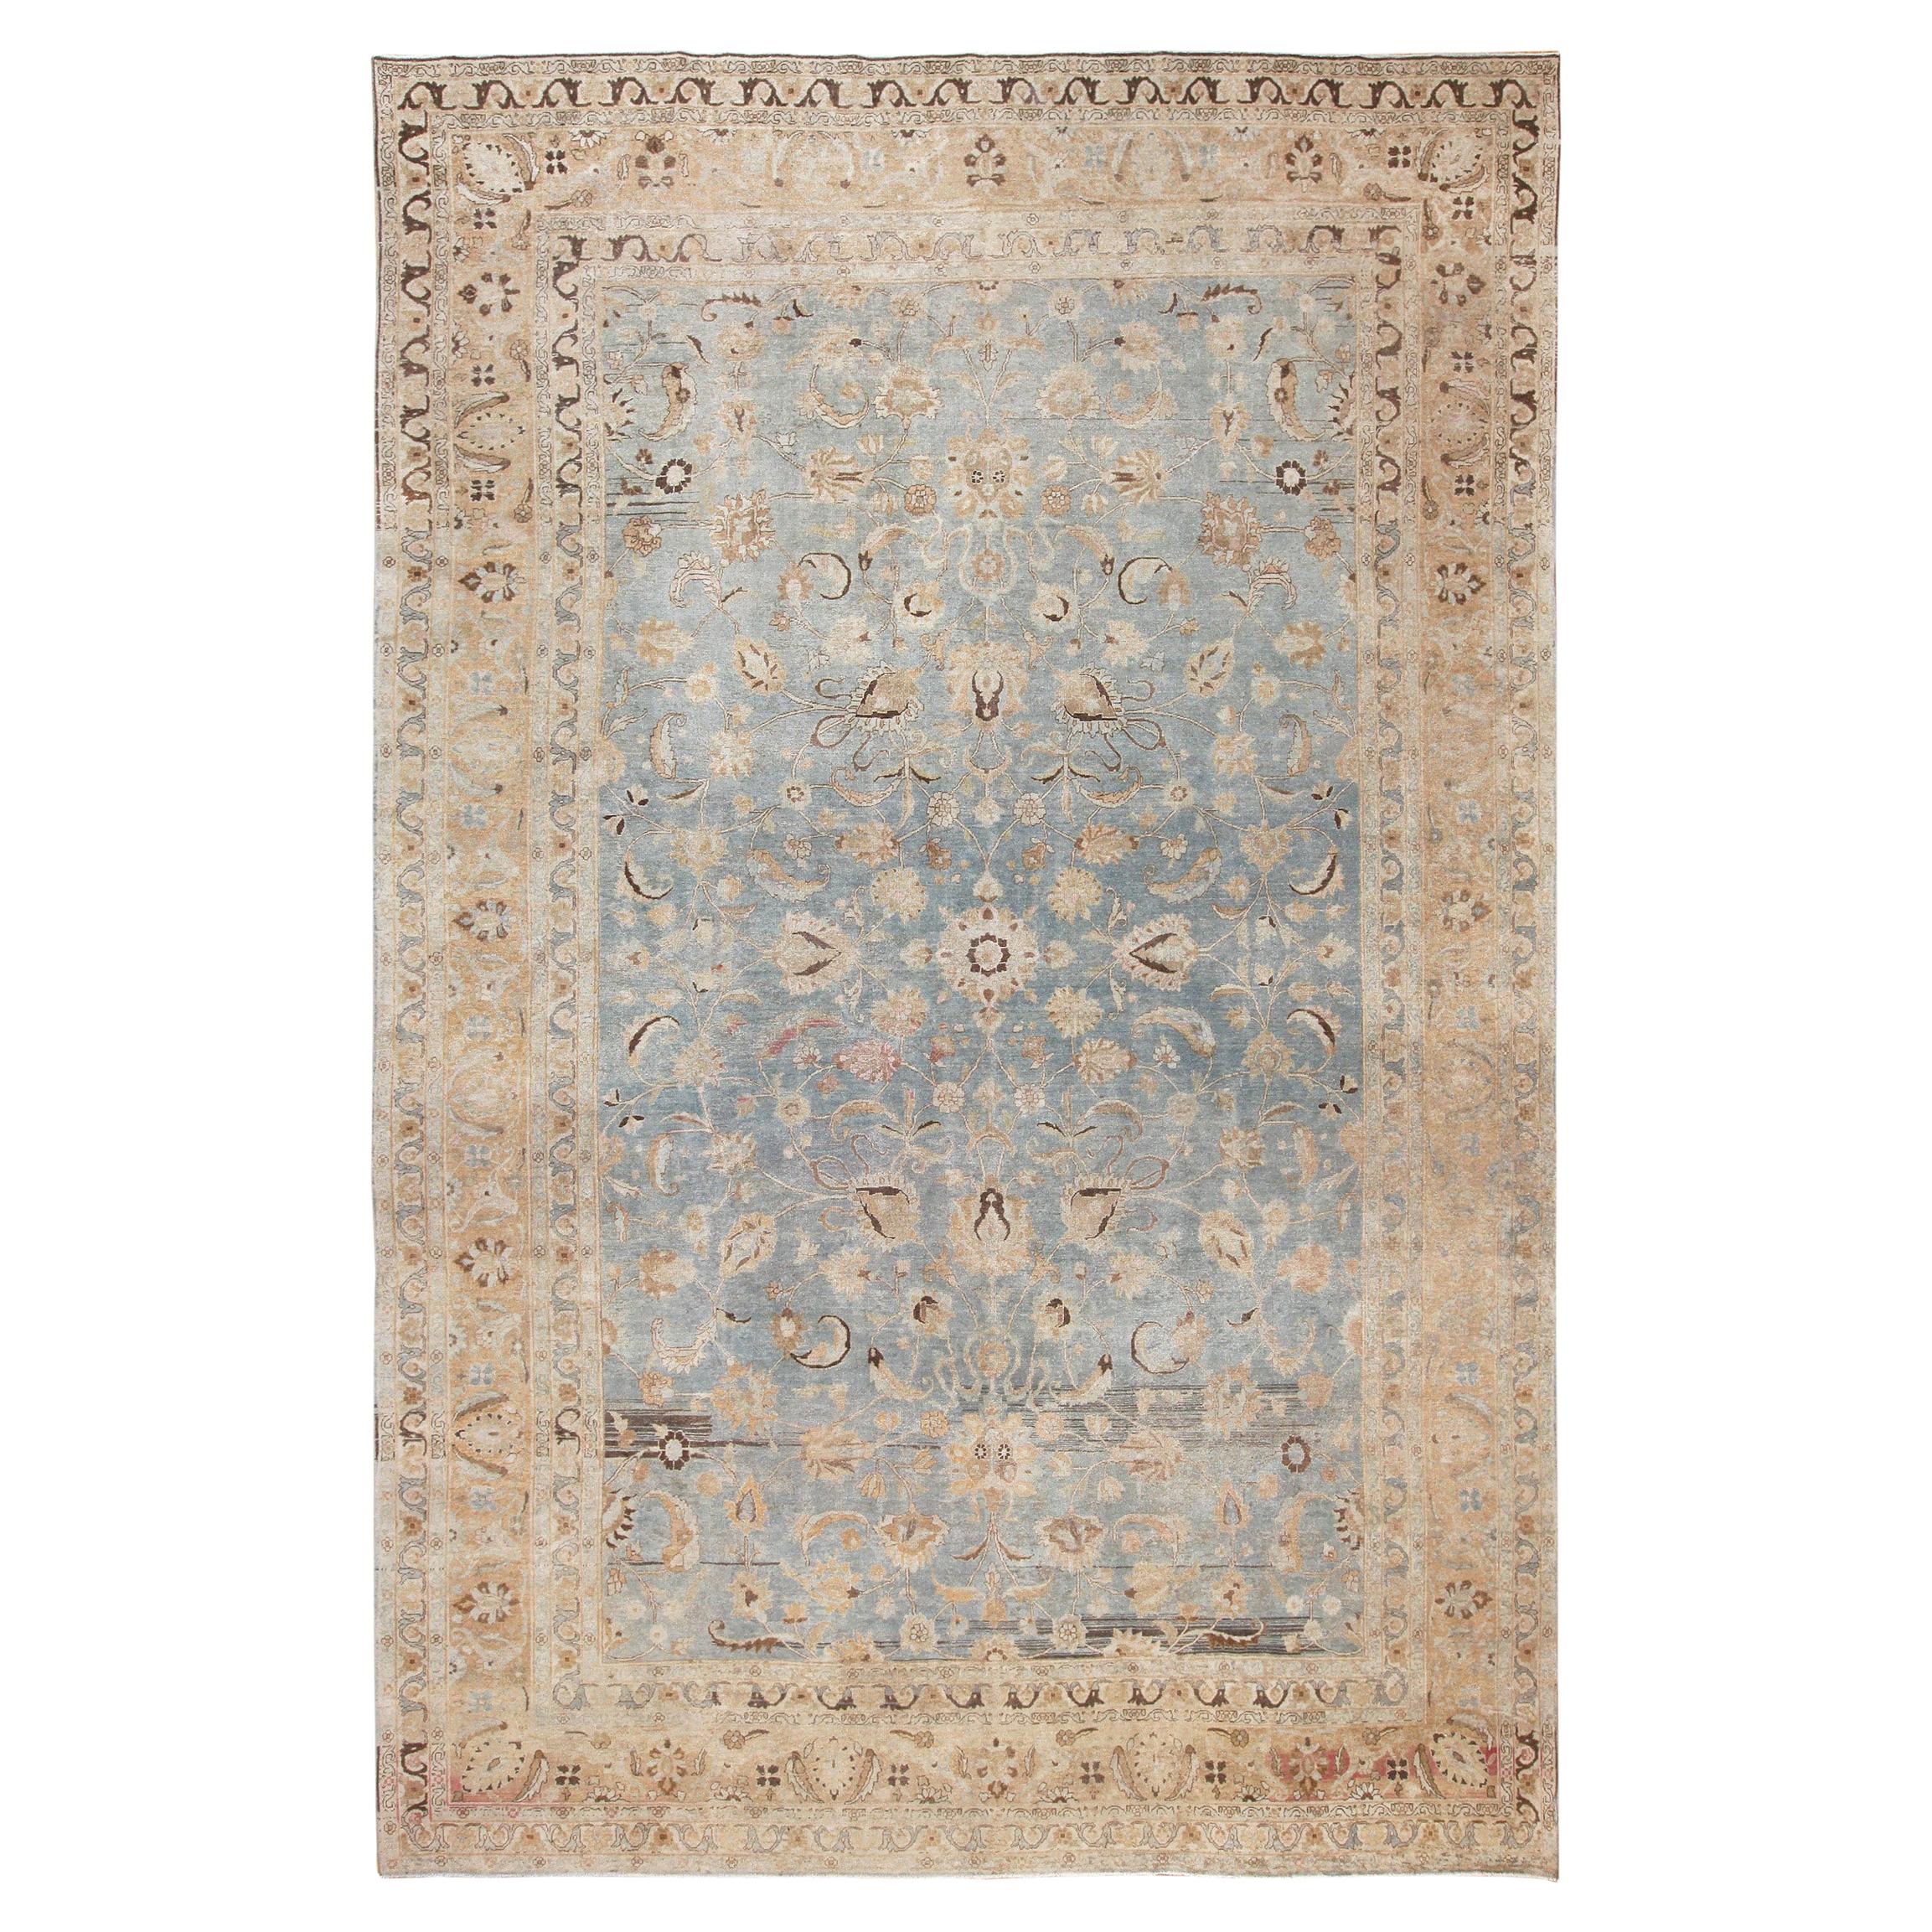 Large Antique Light Blue Persian Khorassan Rug. Size: 10 ft 9 in x 16 ft 10 in